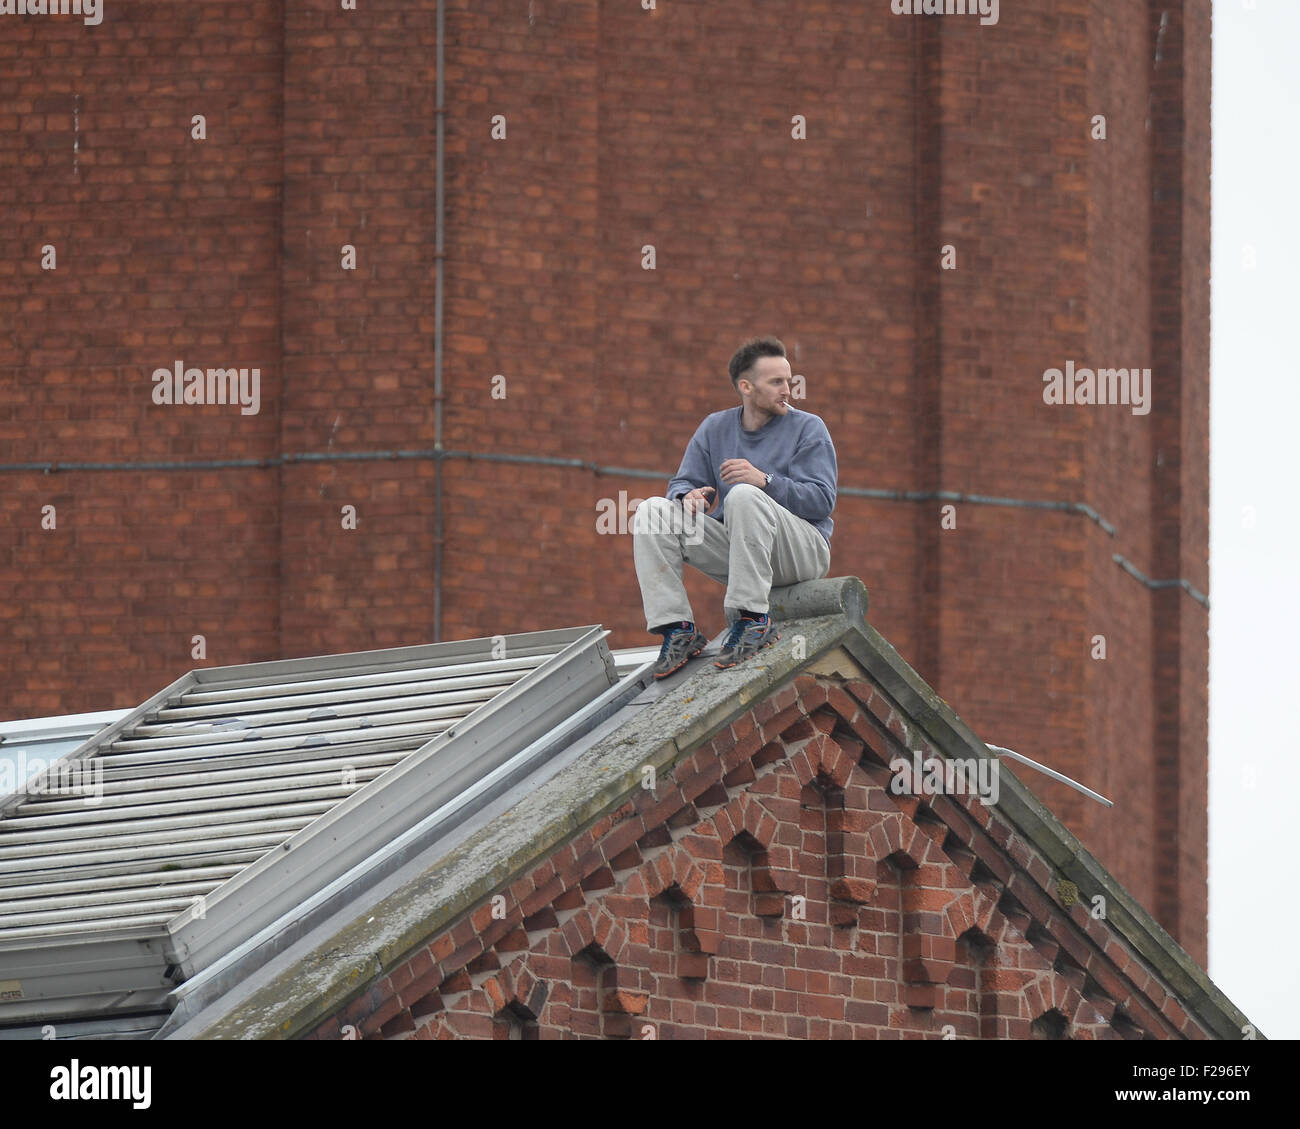 Prisoner Stuart Horner pictured on the roof of HMP Manchester. Stuart Horner's one man protest is about prison conditions Stock Photo